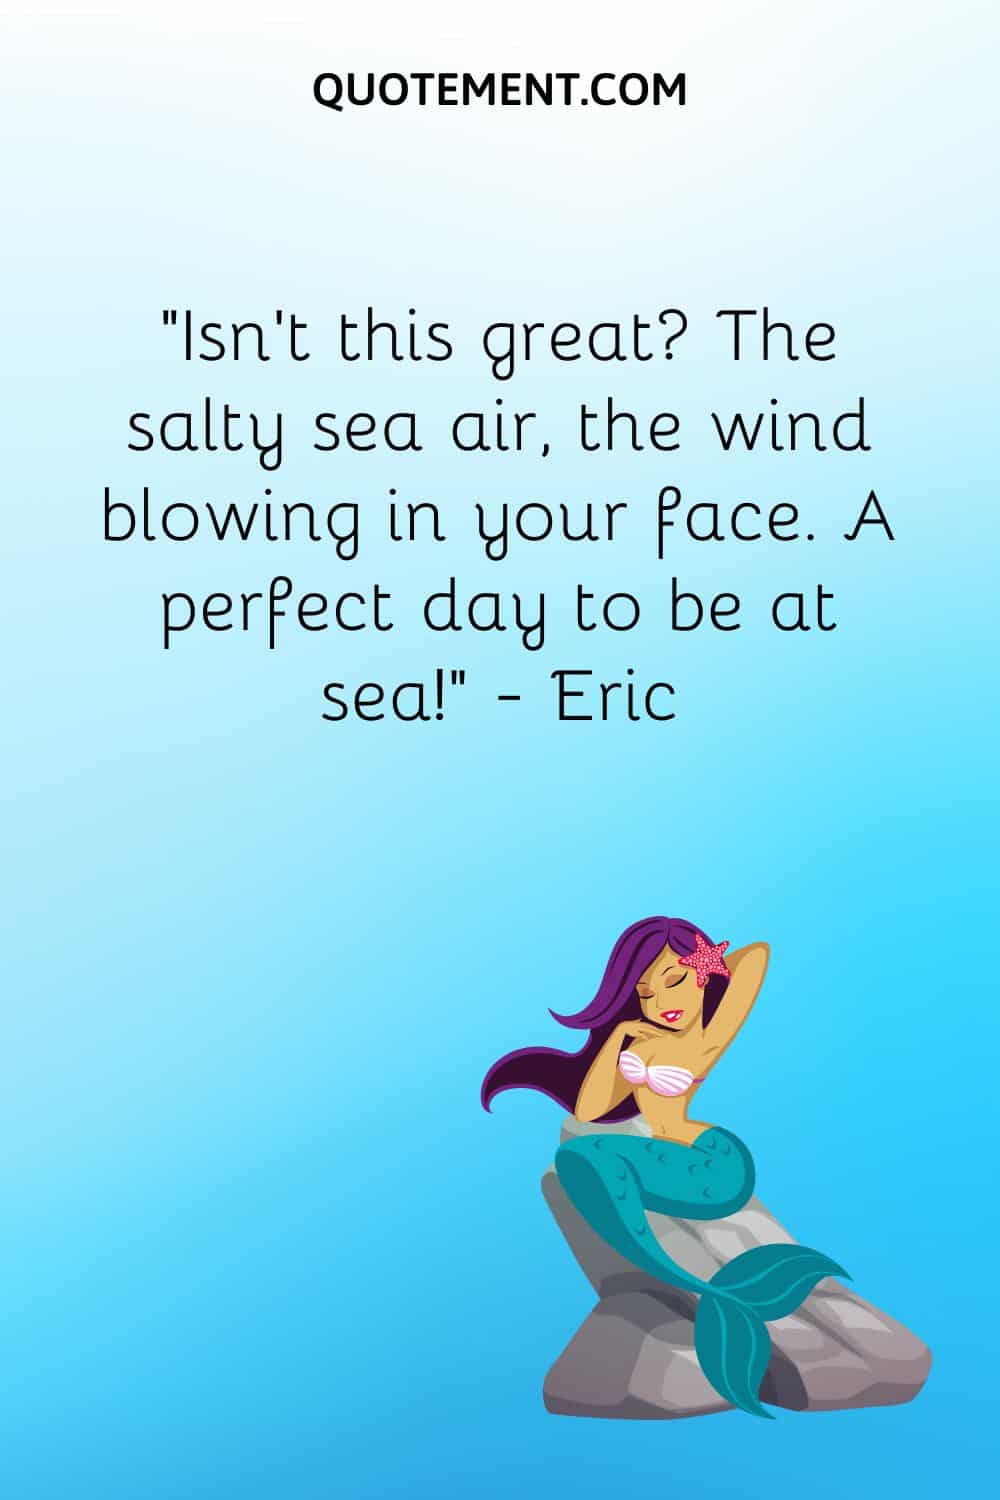 “Isn’t this great The salty sea air, the wind blowing in your face. A perfect day to be at sea!” ― Eric